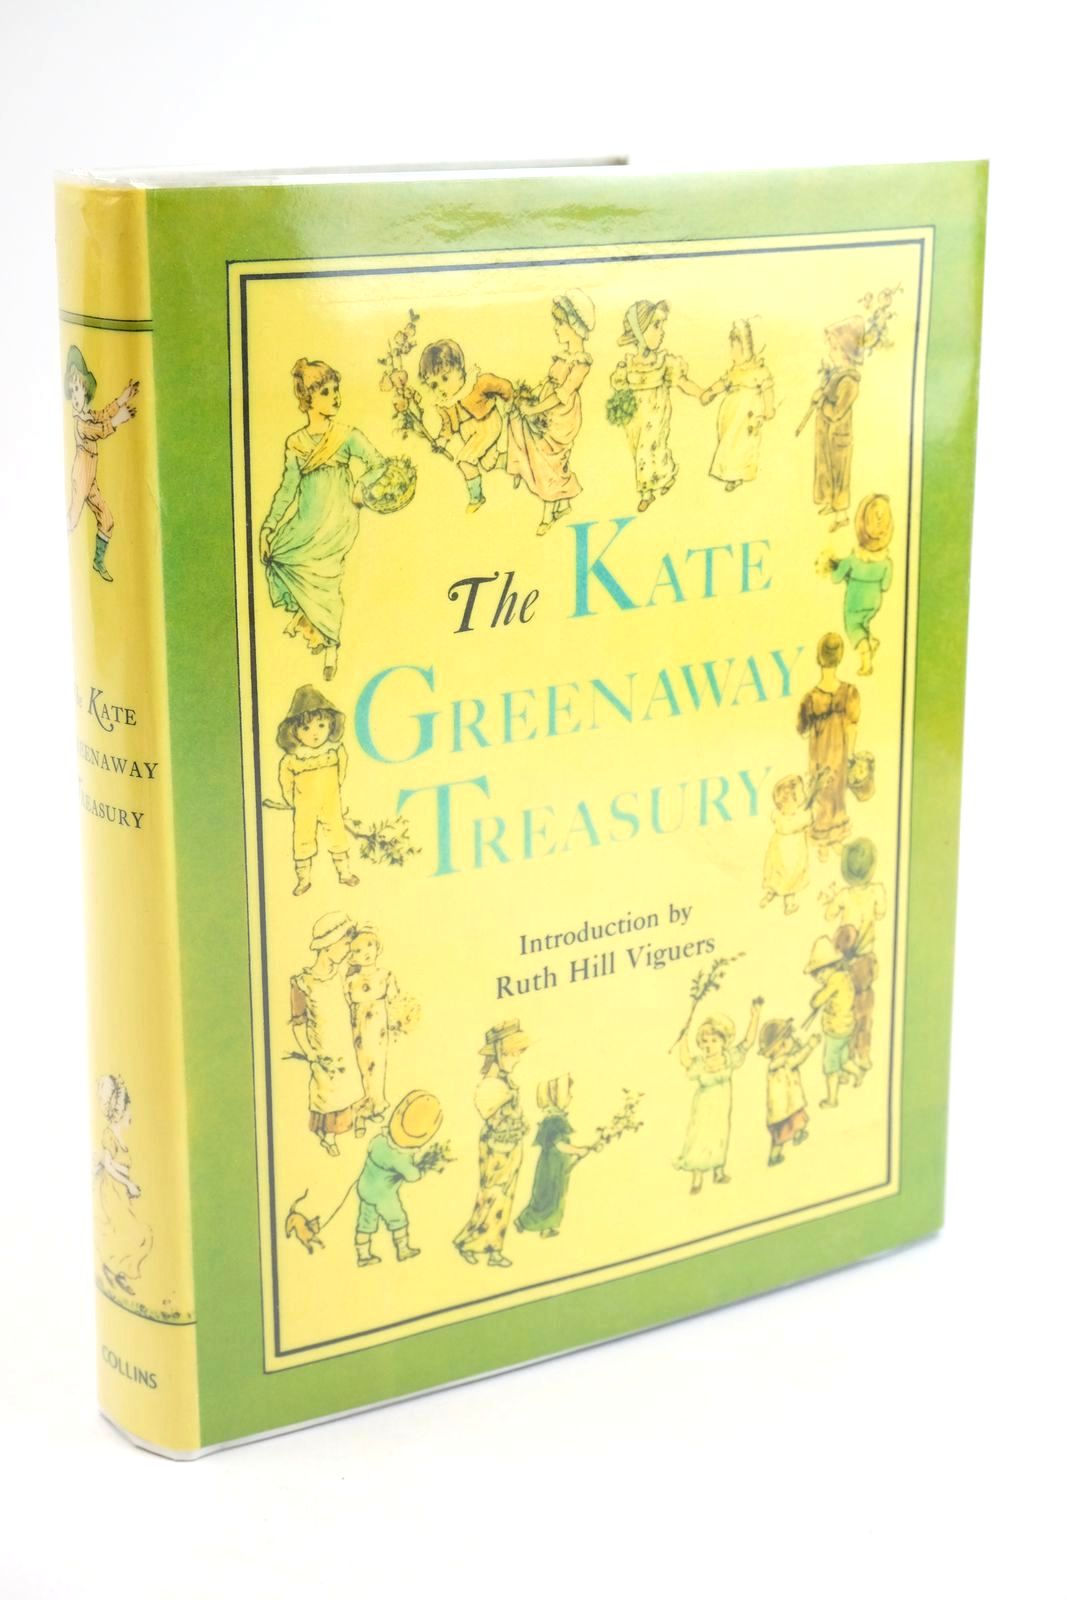 Photo of THE KATE GREENAWAY TREASURY written by Viguers, Ruth Hill Ernest, Edward illustrated by Greenaway, Kate published by Collins (STOCK CODE: 1323631)  for sale by Stella & Rose's Books